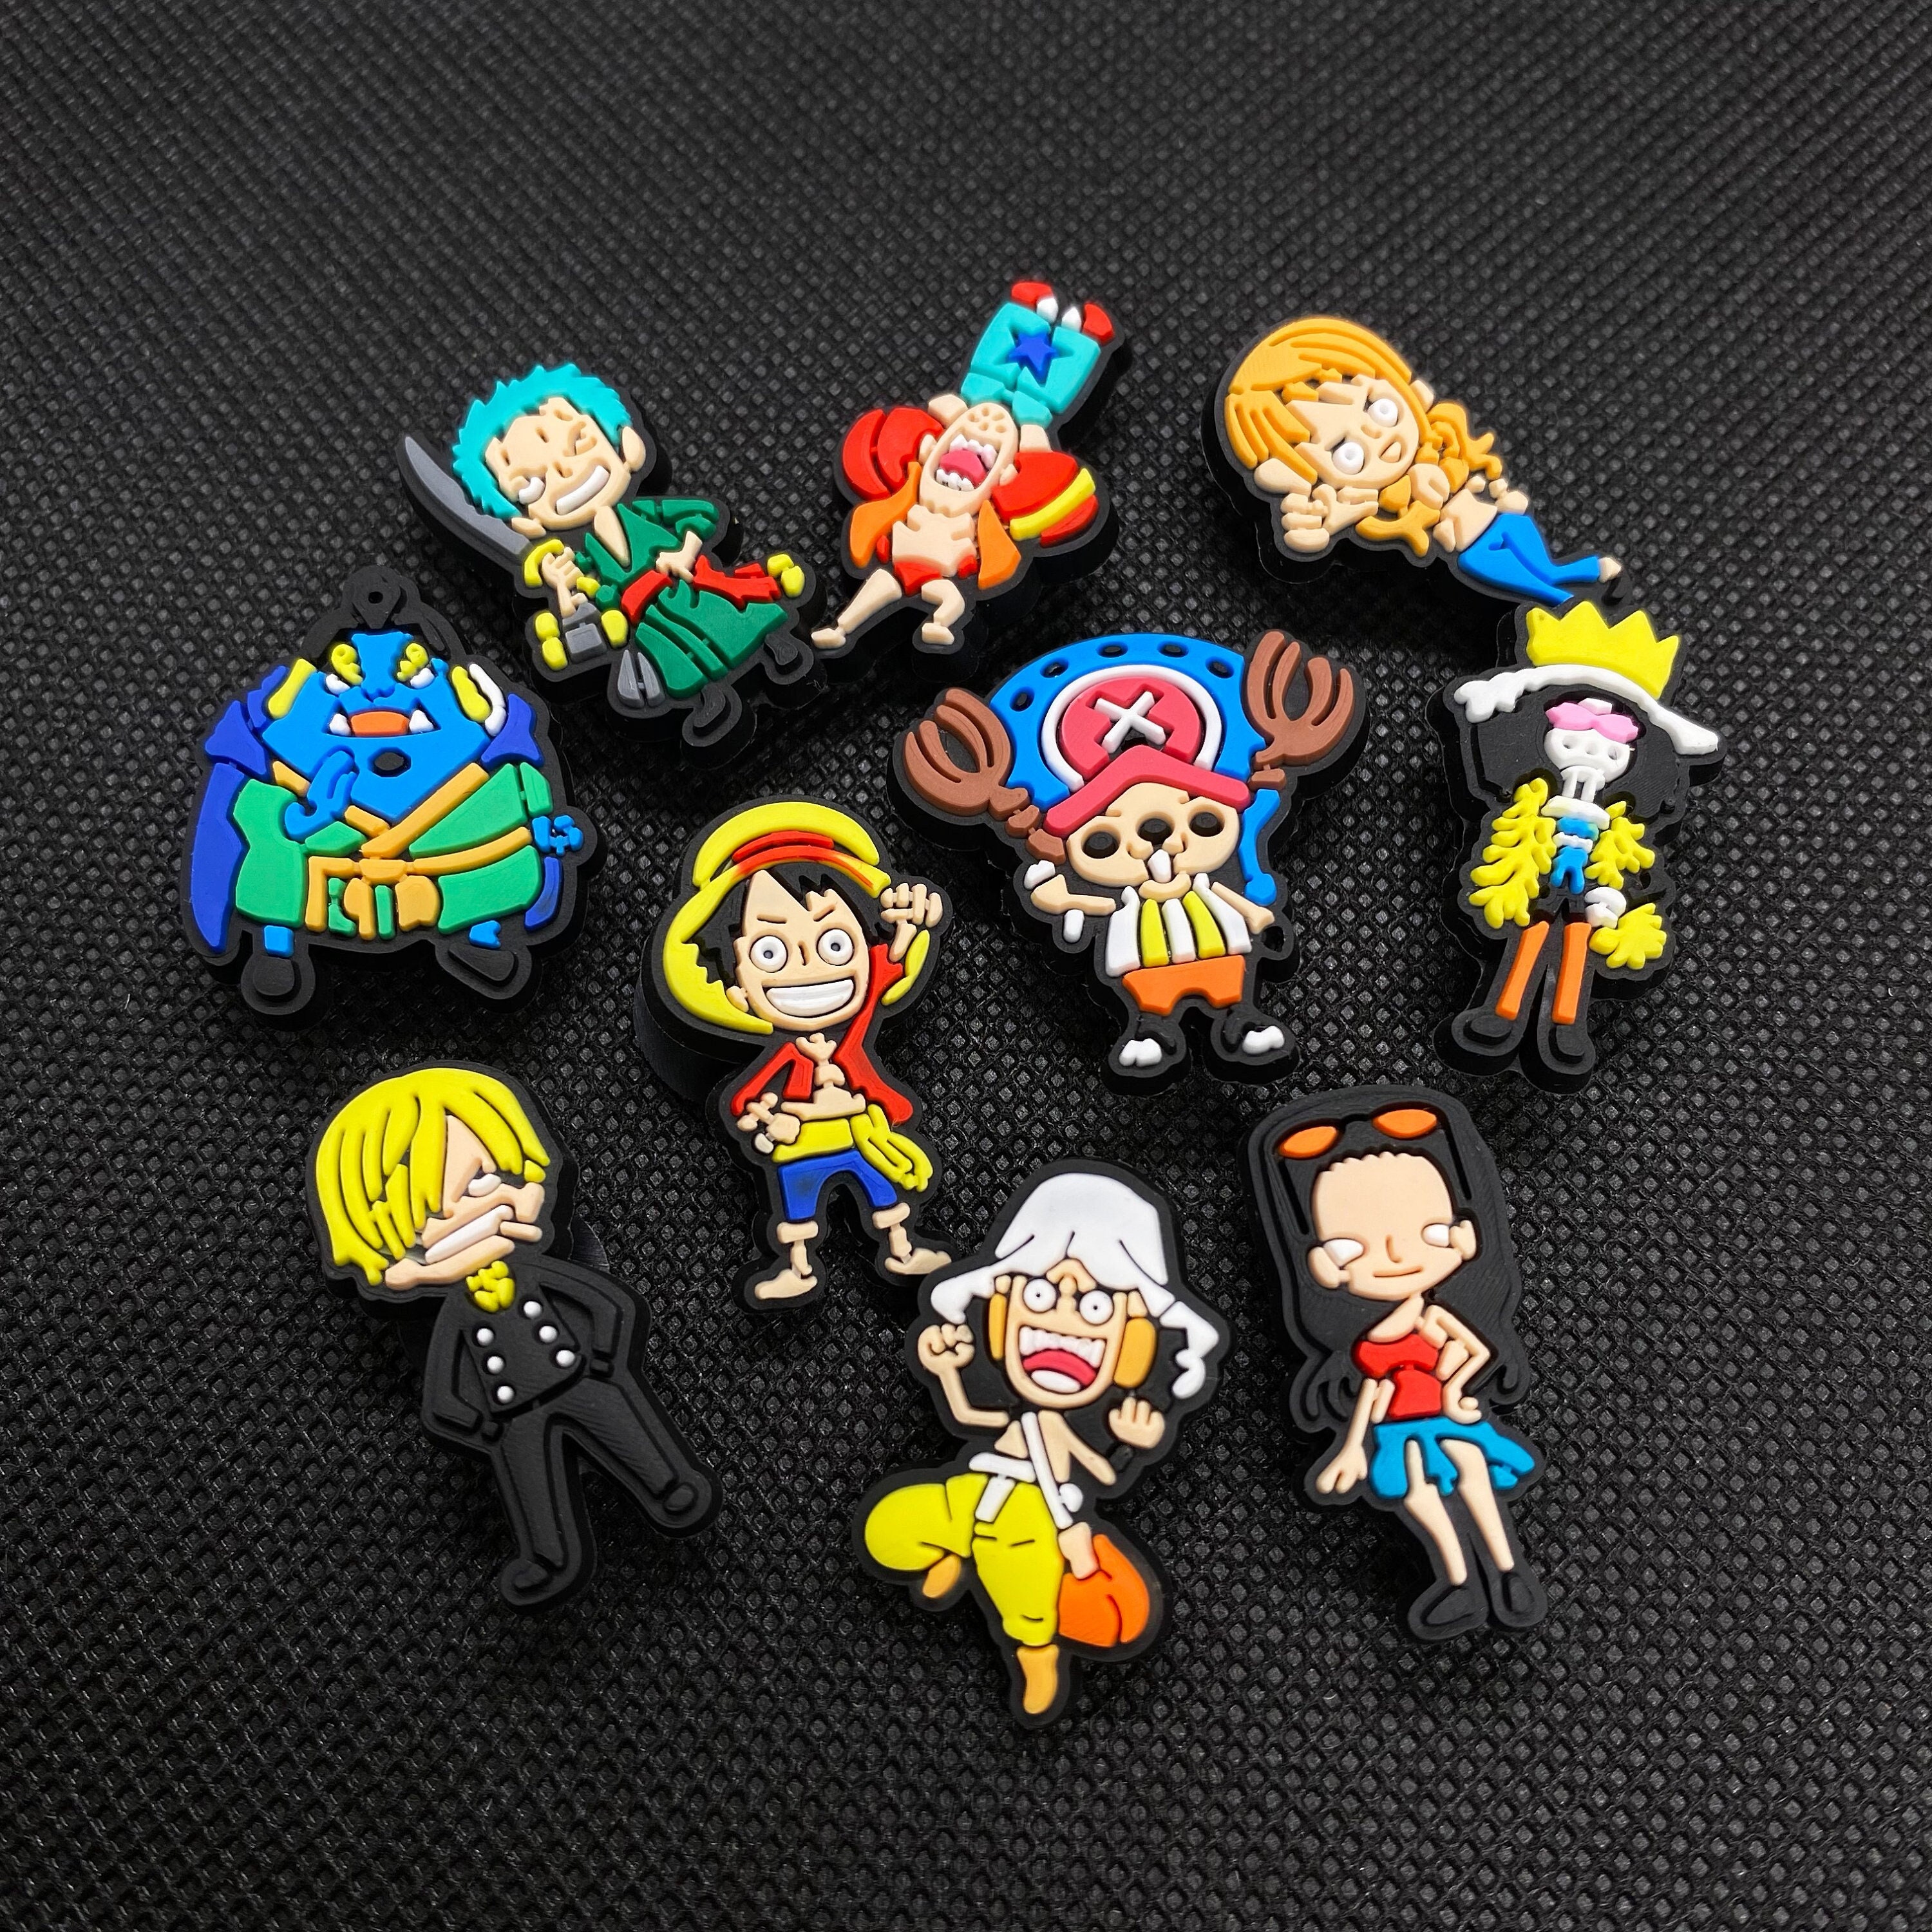 One Piece Anime Croc Charms Jibbitz Set for Crocs Shoe Accessories Trending  One Piece Charms for Clogs Fashionable Jibbitz 